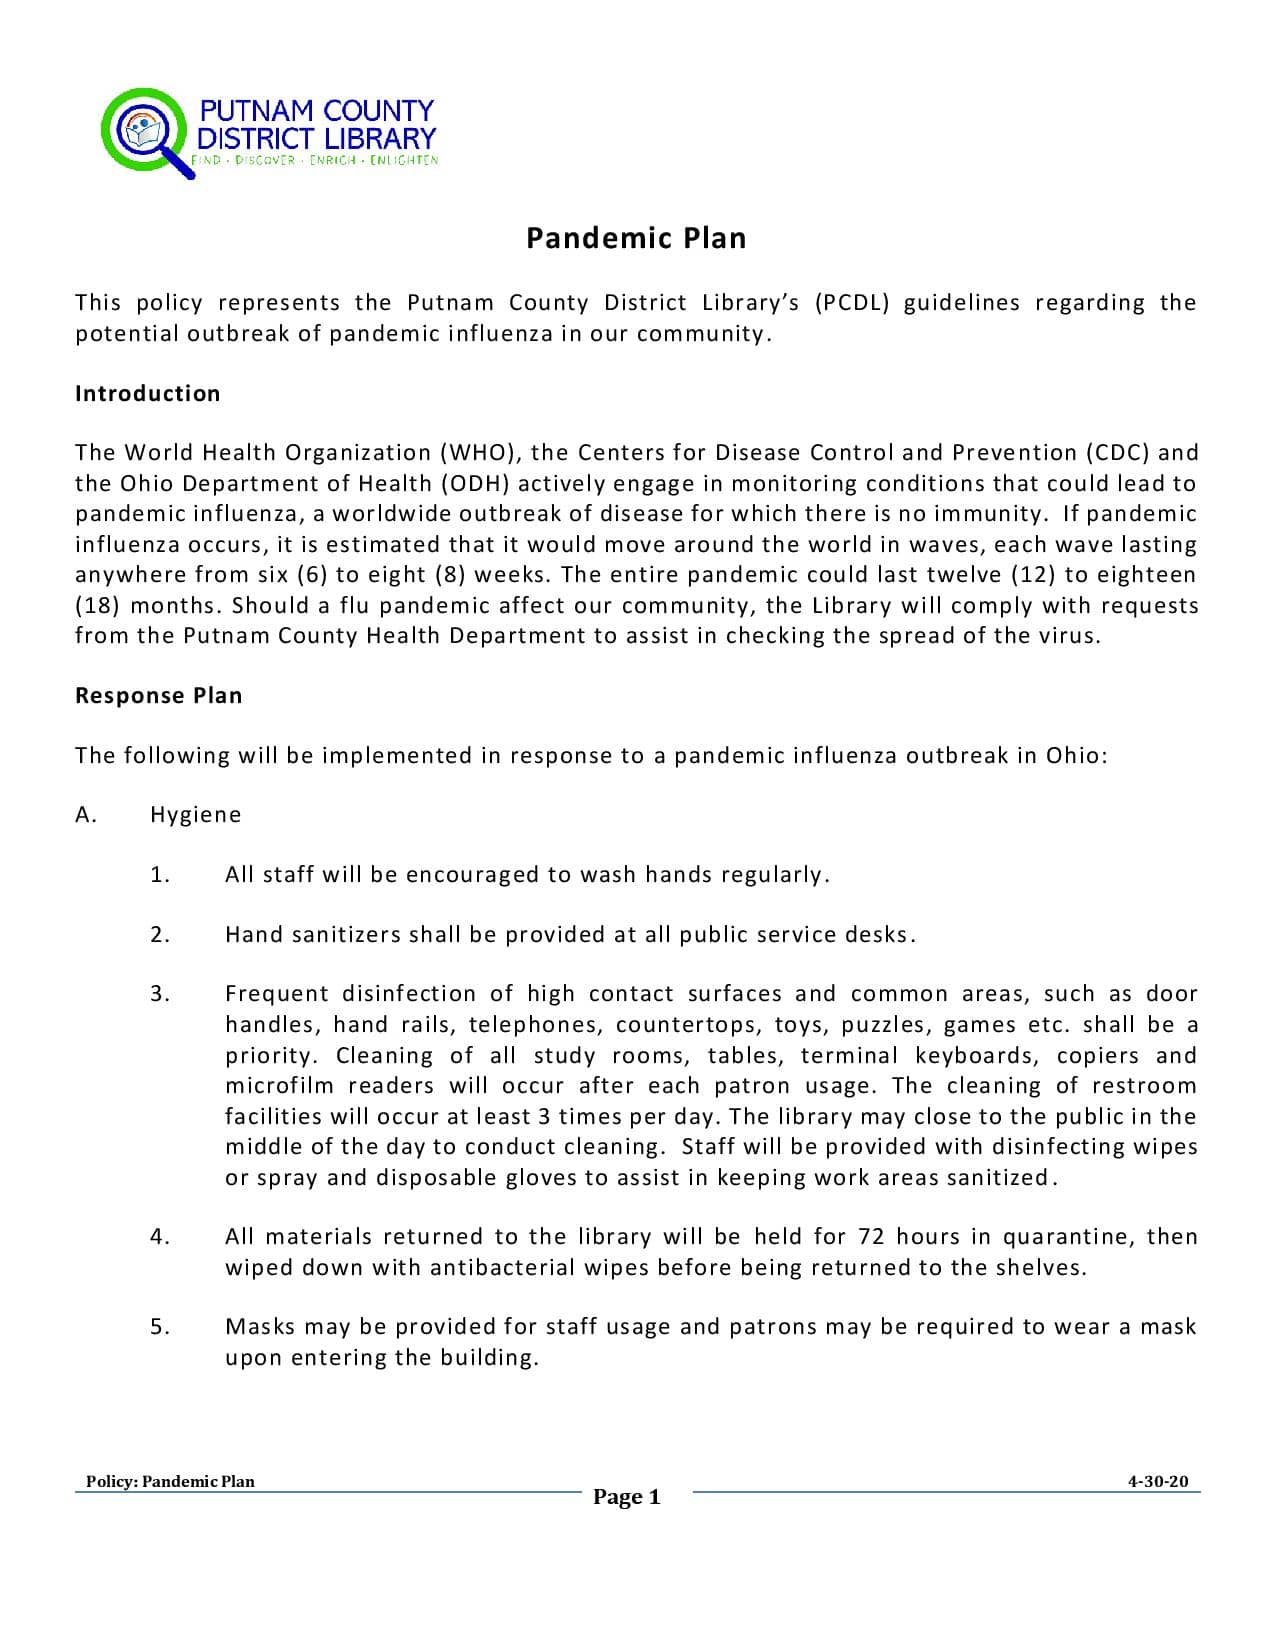 Pandemic Policy page 1